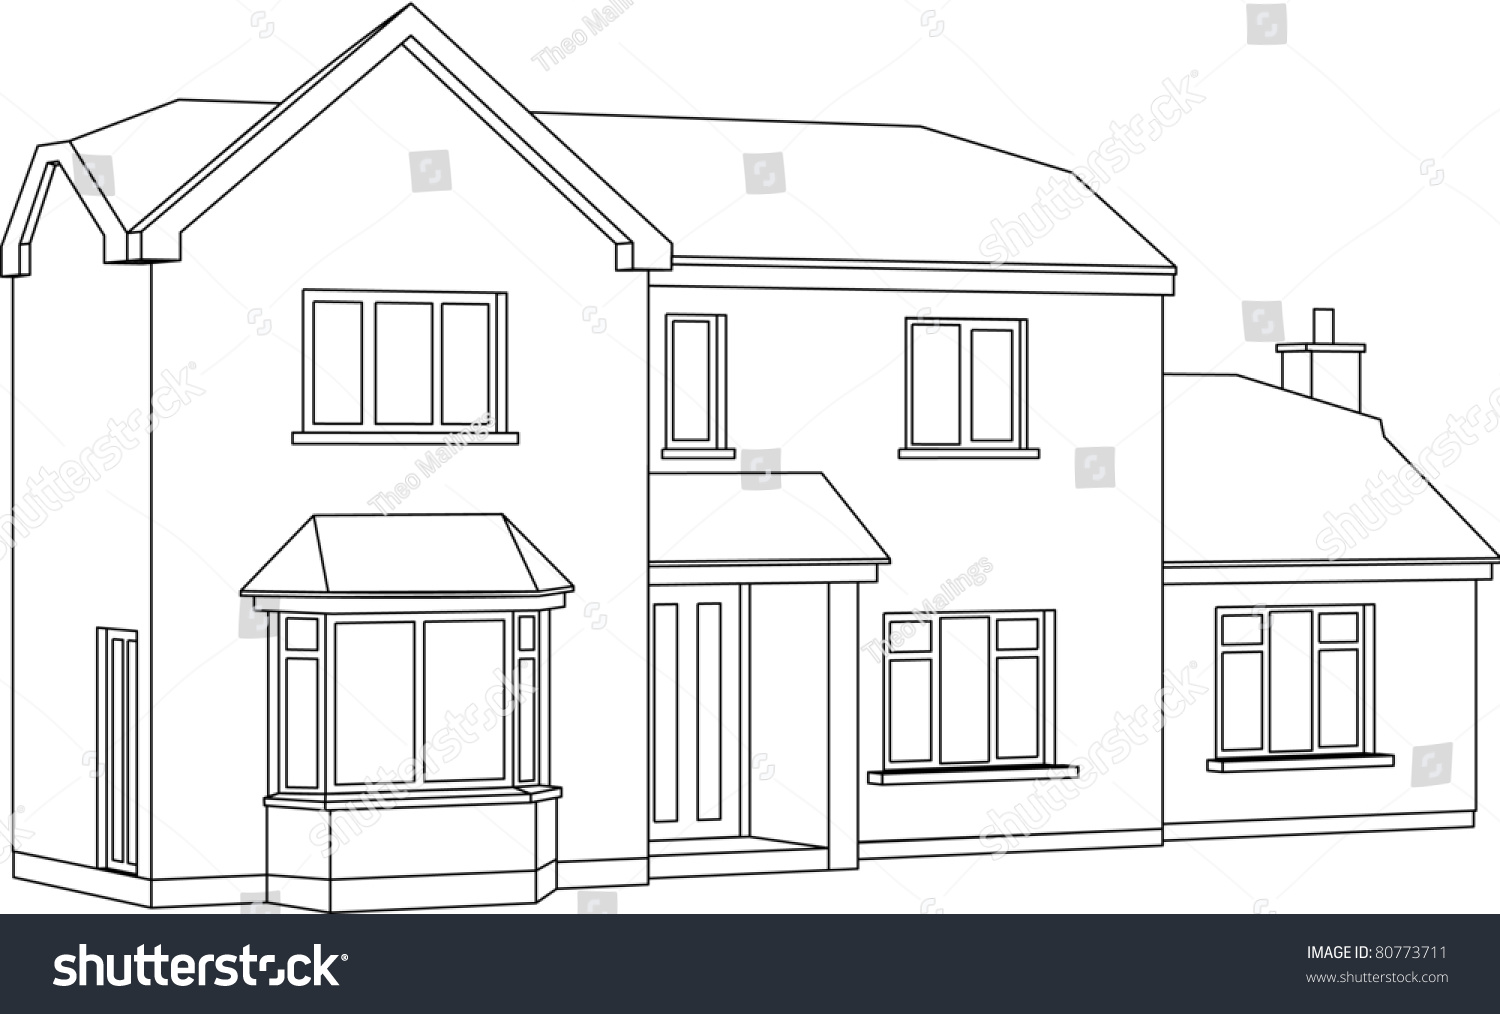 two storey house clipart - photo #25